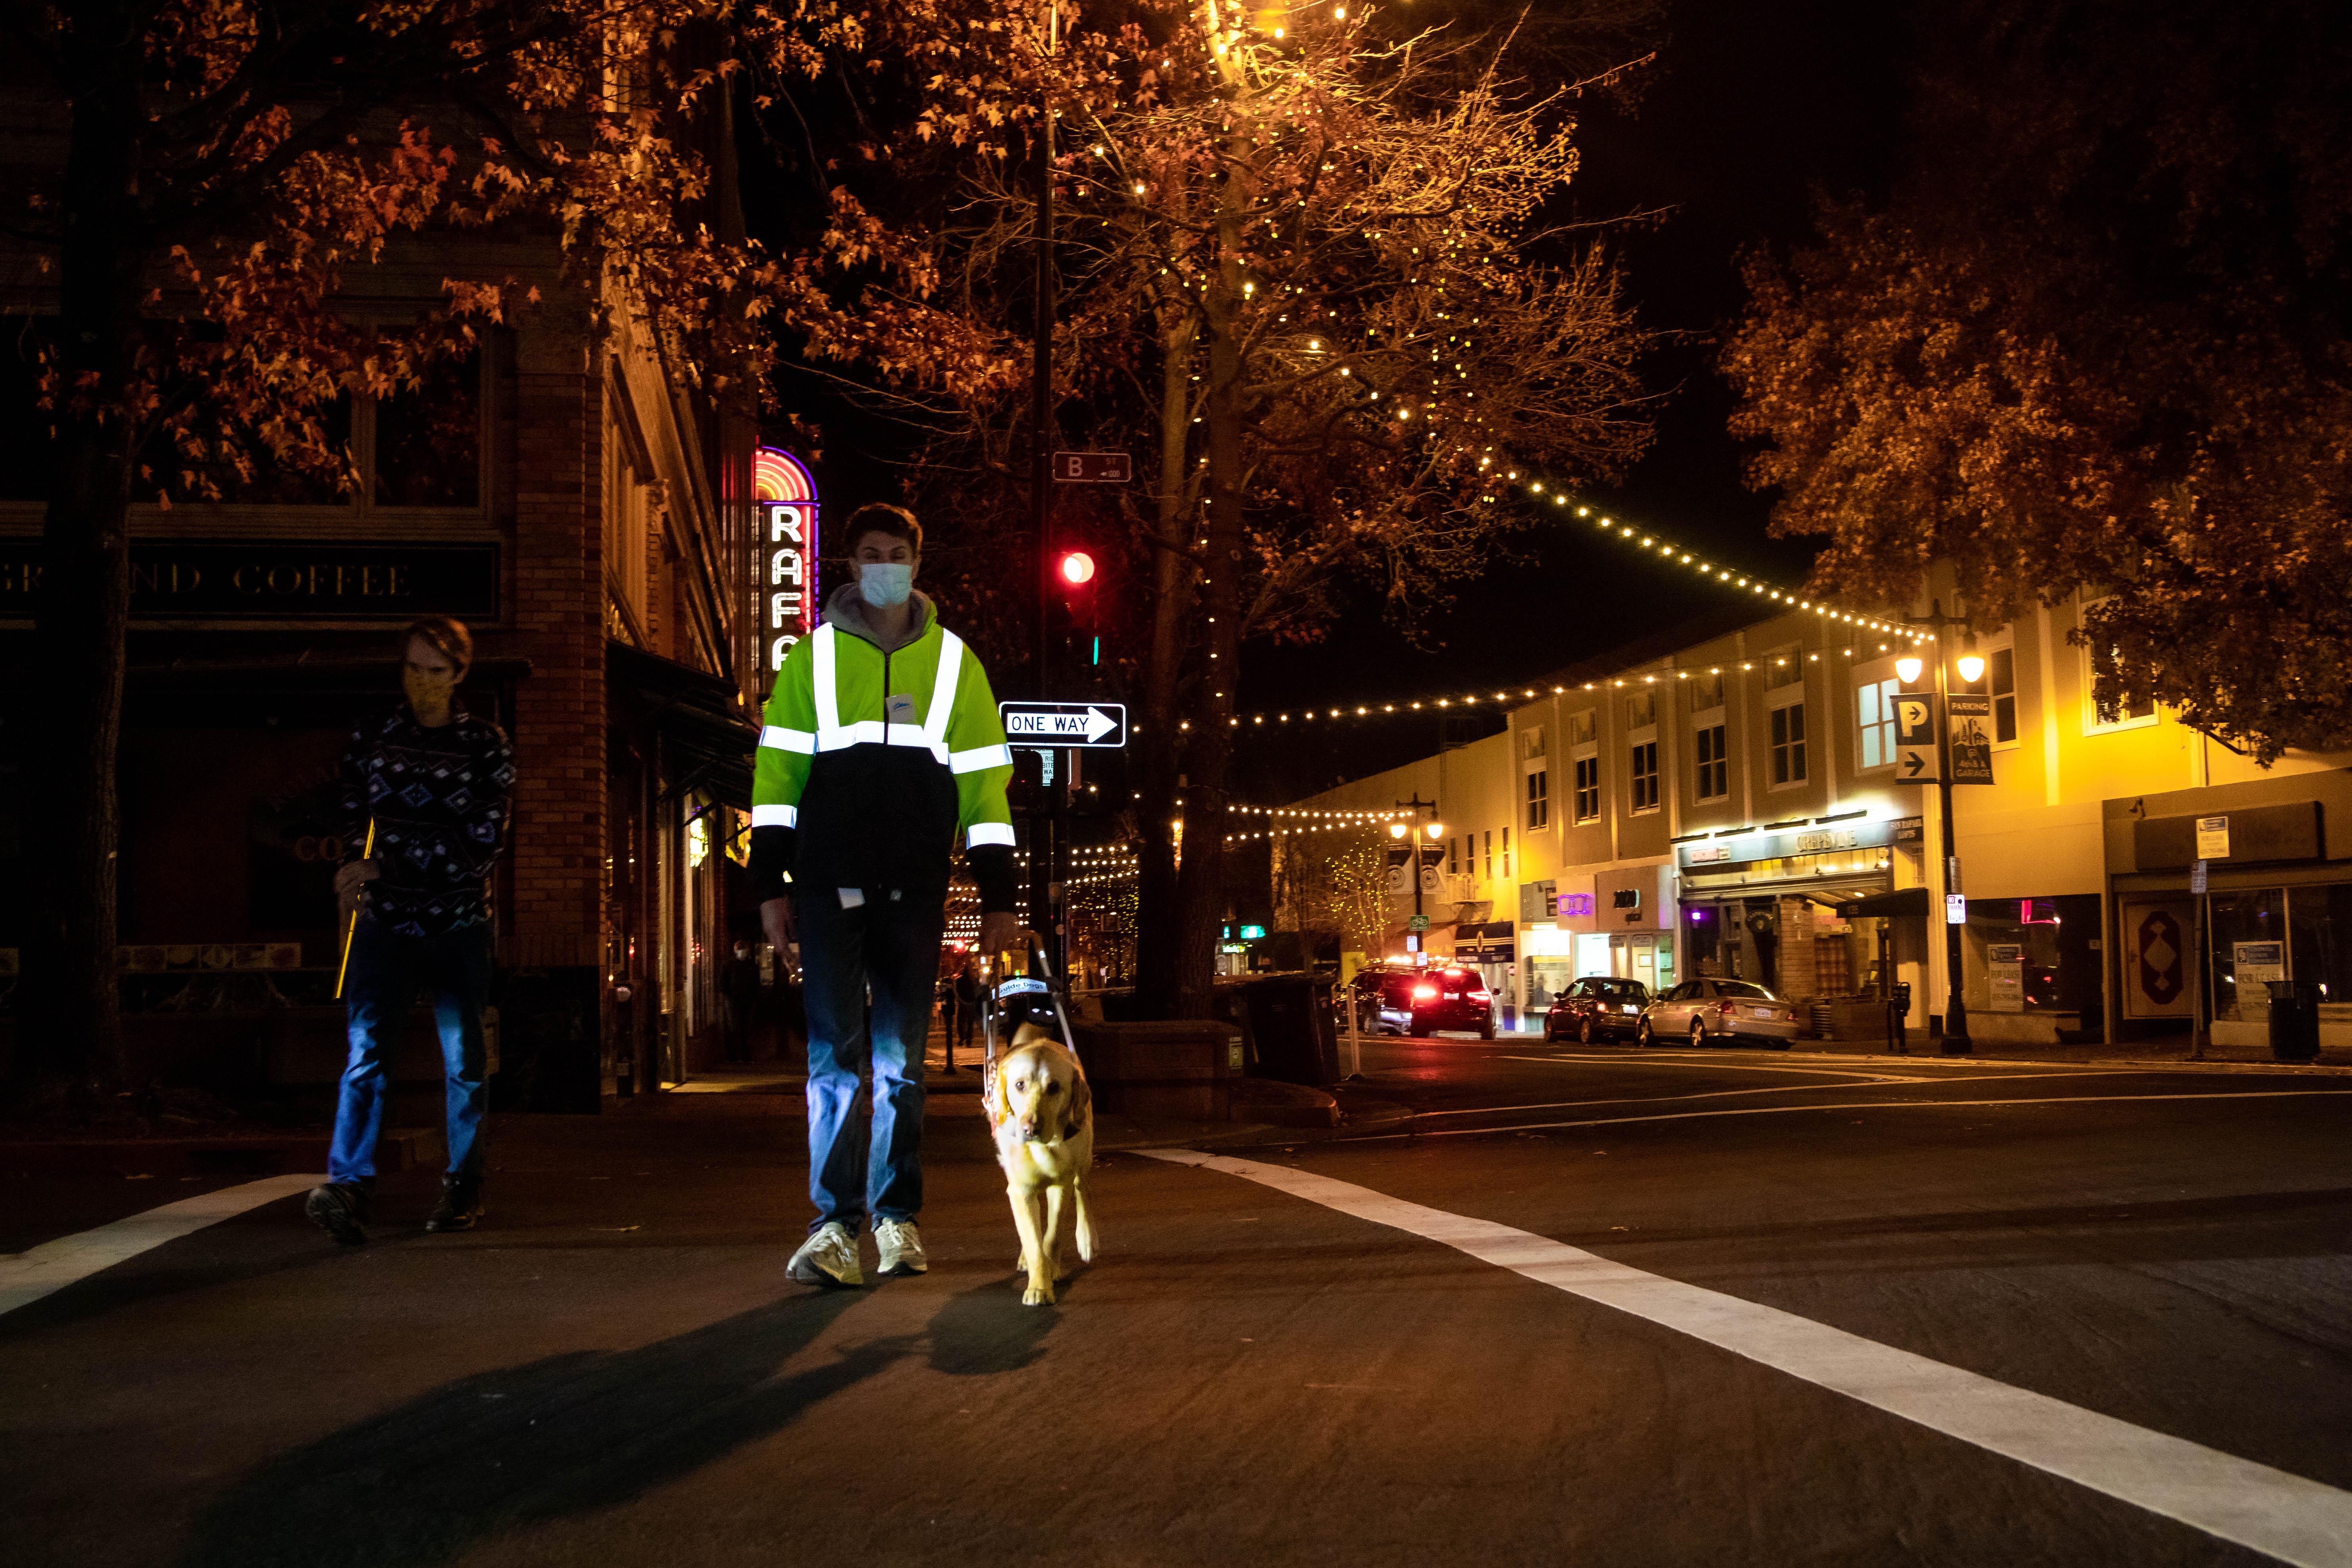 A young man wearing a reflective safety jacket walking with his guide dog across a street at night.